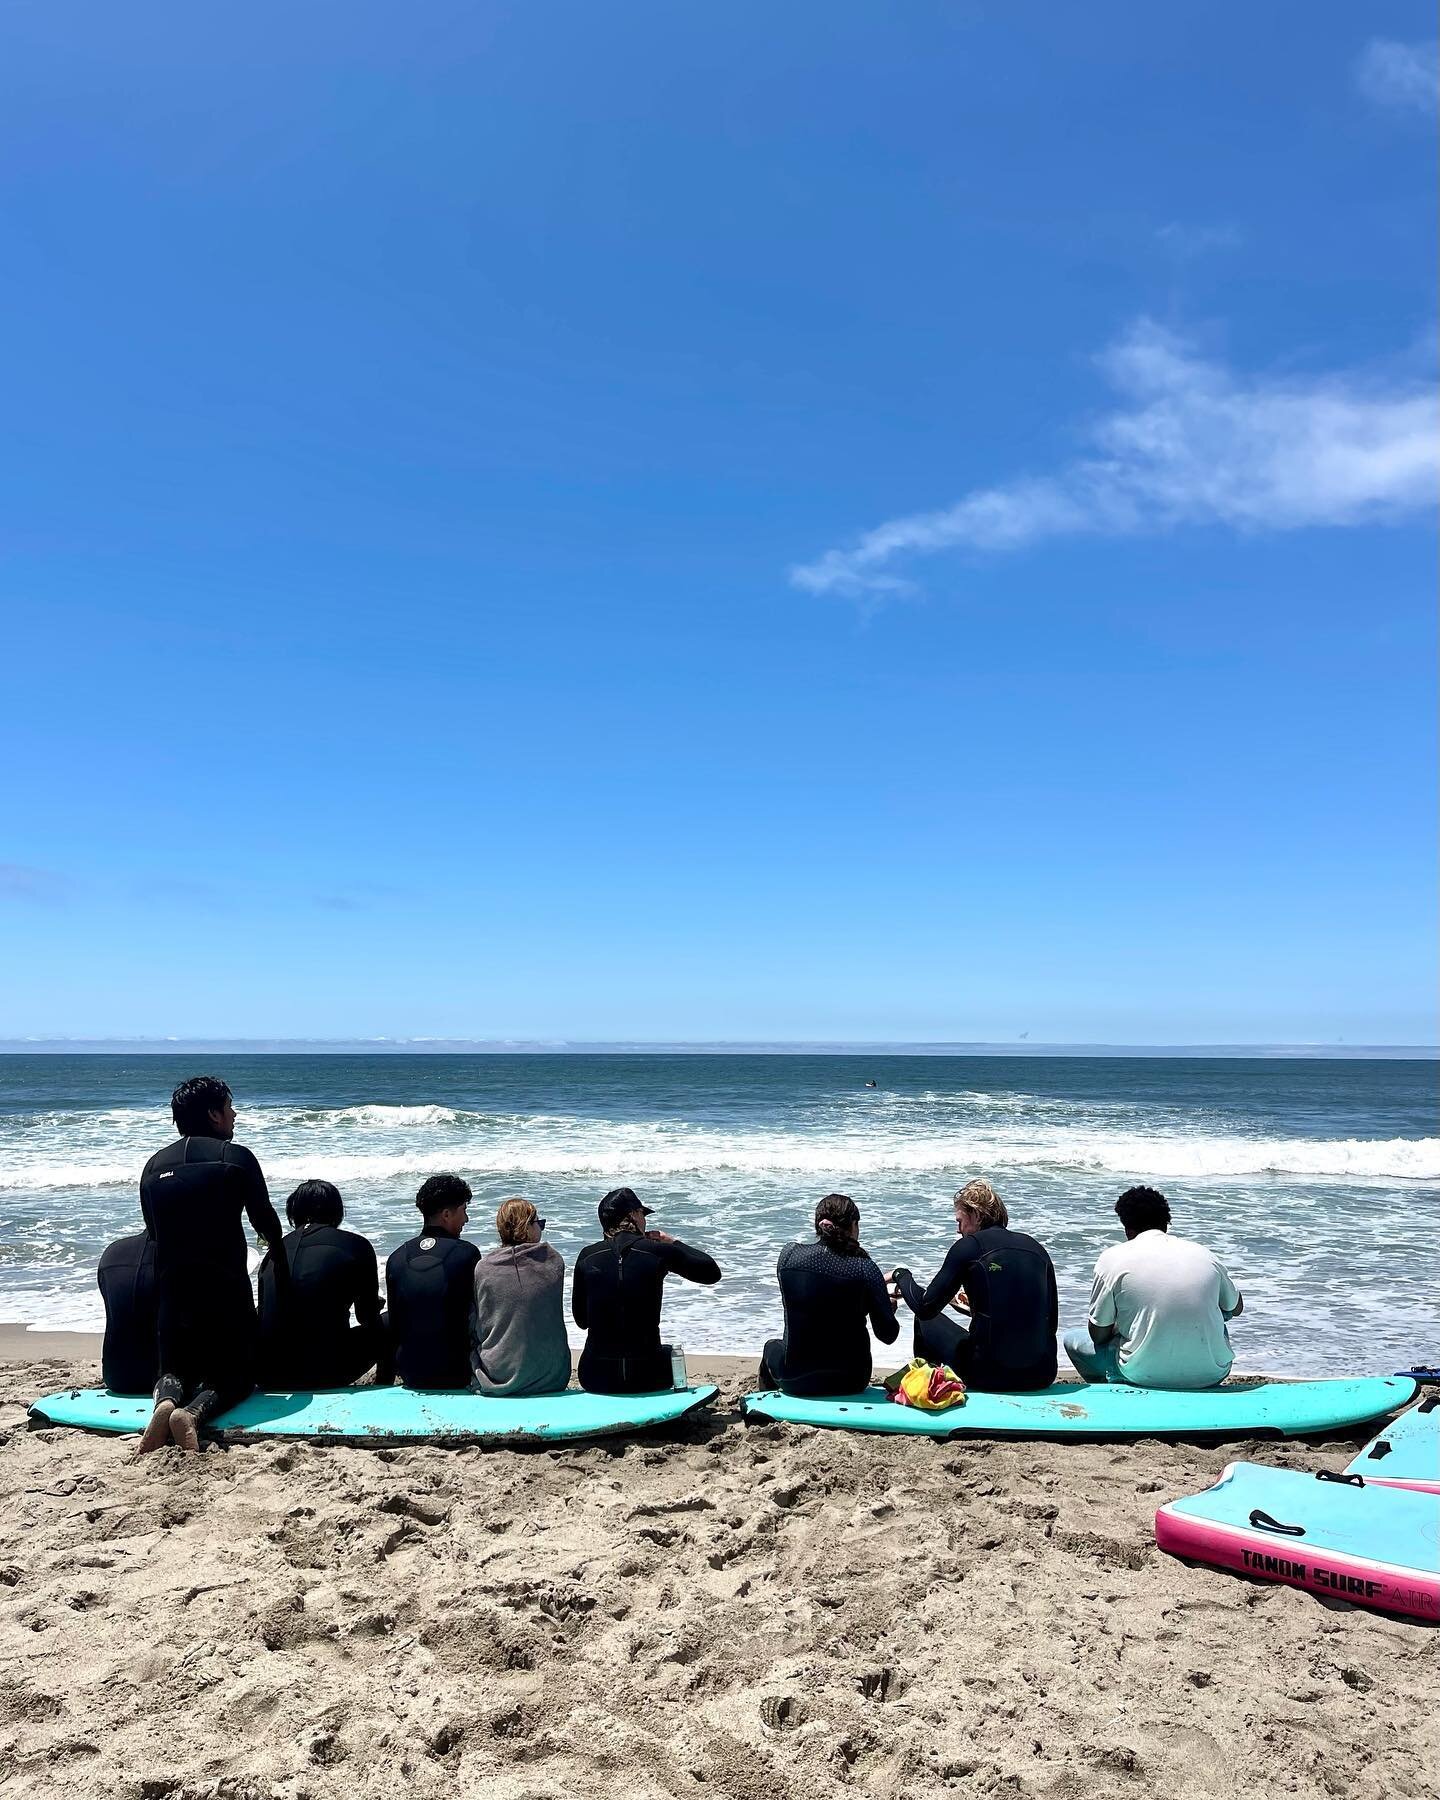 Another really special day spent today with #pajarovalleysurfclub and SF community youth down in Santa Cruz. Beautiful weather, fun waves, beach BBQ and lots of smiles and stoke! Special thanks to Craig and Shannon @mewater_santacruz for helping supp